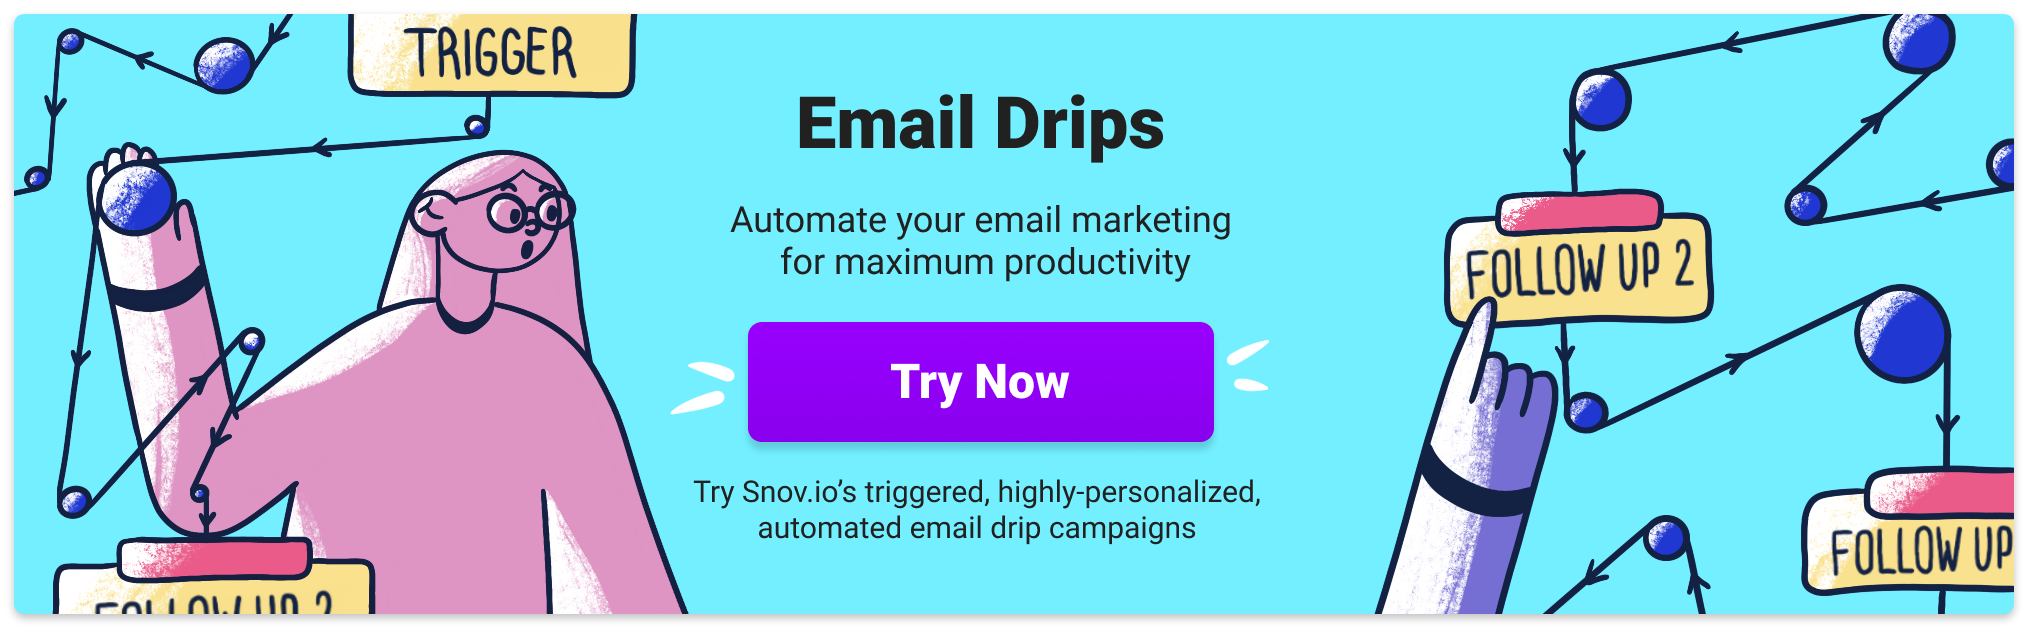 email drips